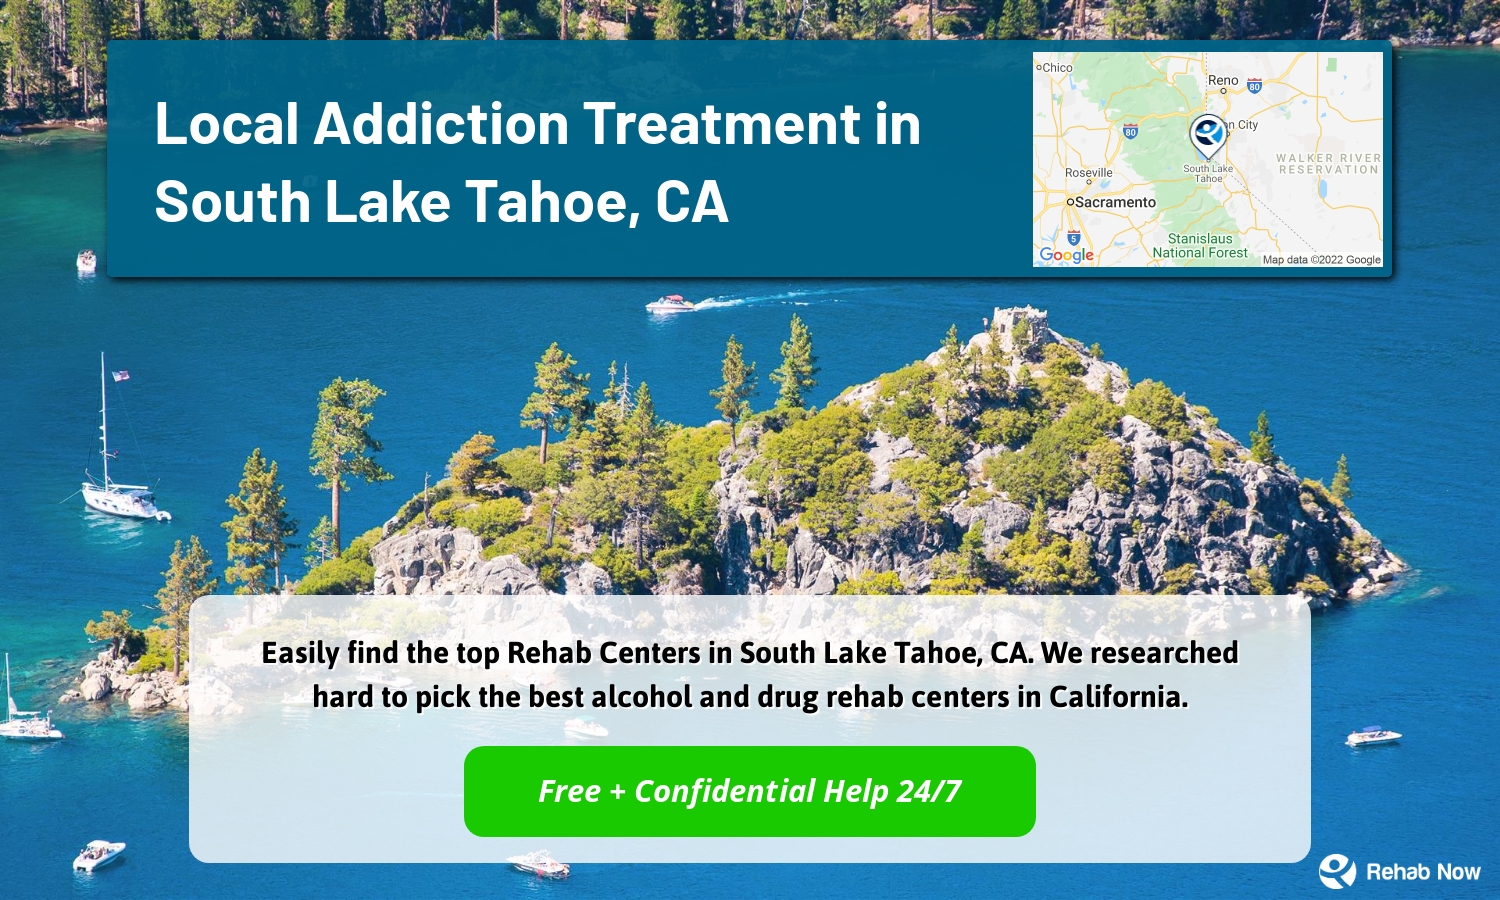 Easily find the top Rehab Centers in South Lake Tahoe, CA. We researched hard to pick the best alcohol and drug rehab centers in California.